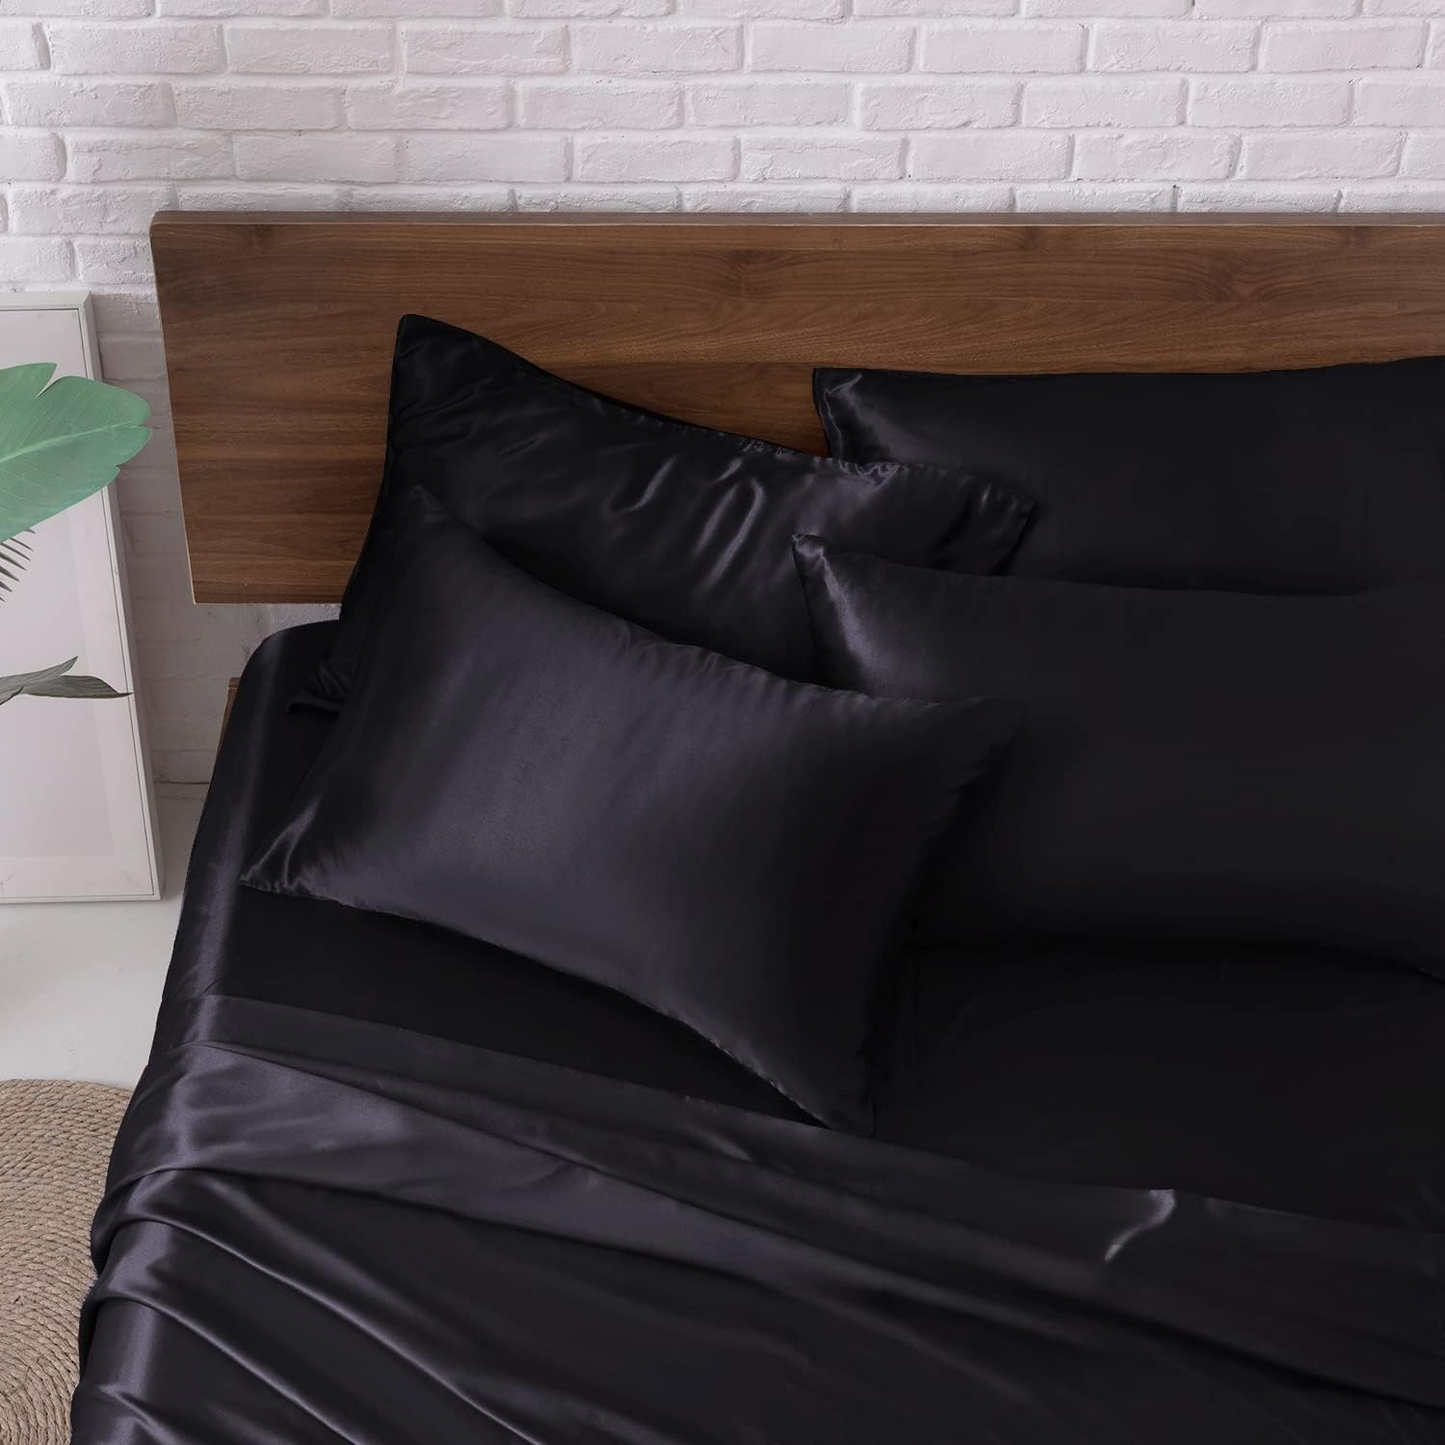 Luxurious black satin sheet set with coordinating pillowcases by CloudSatin Dream.